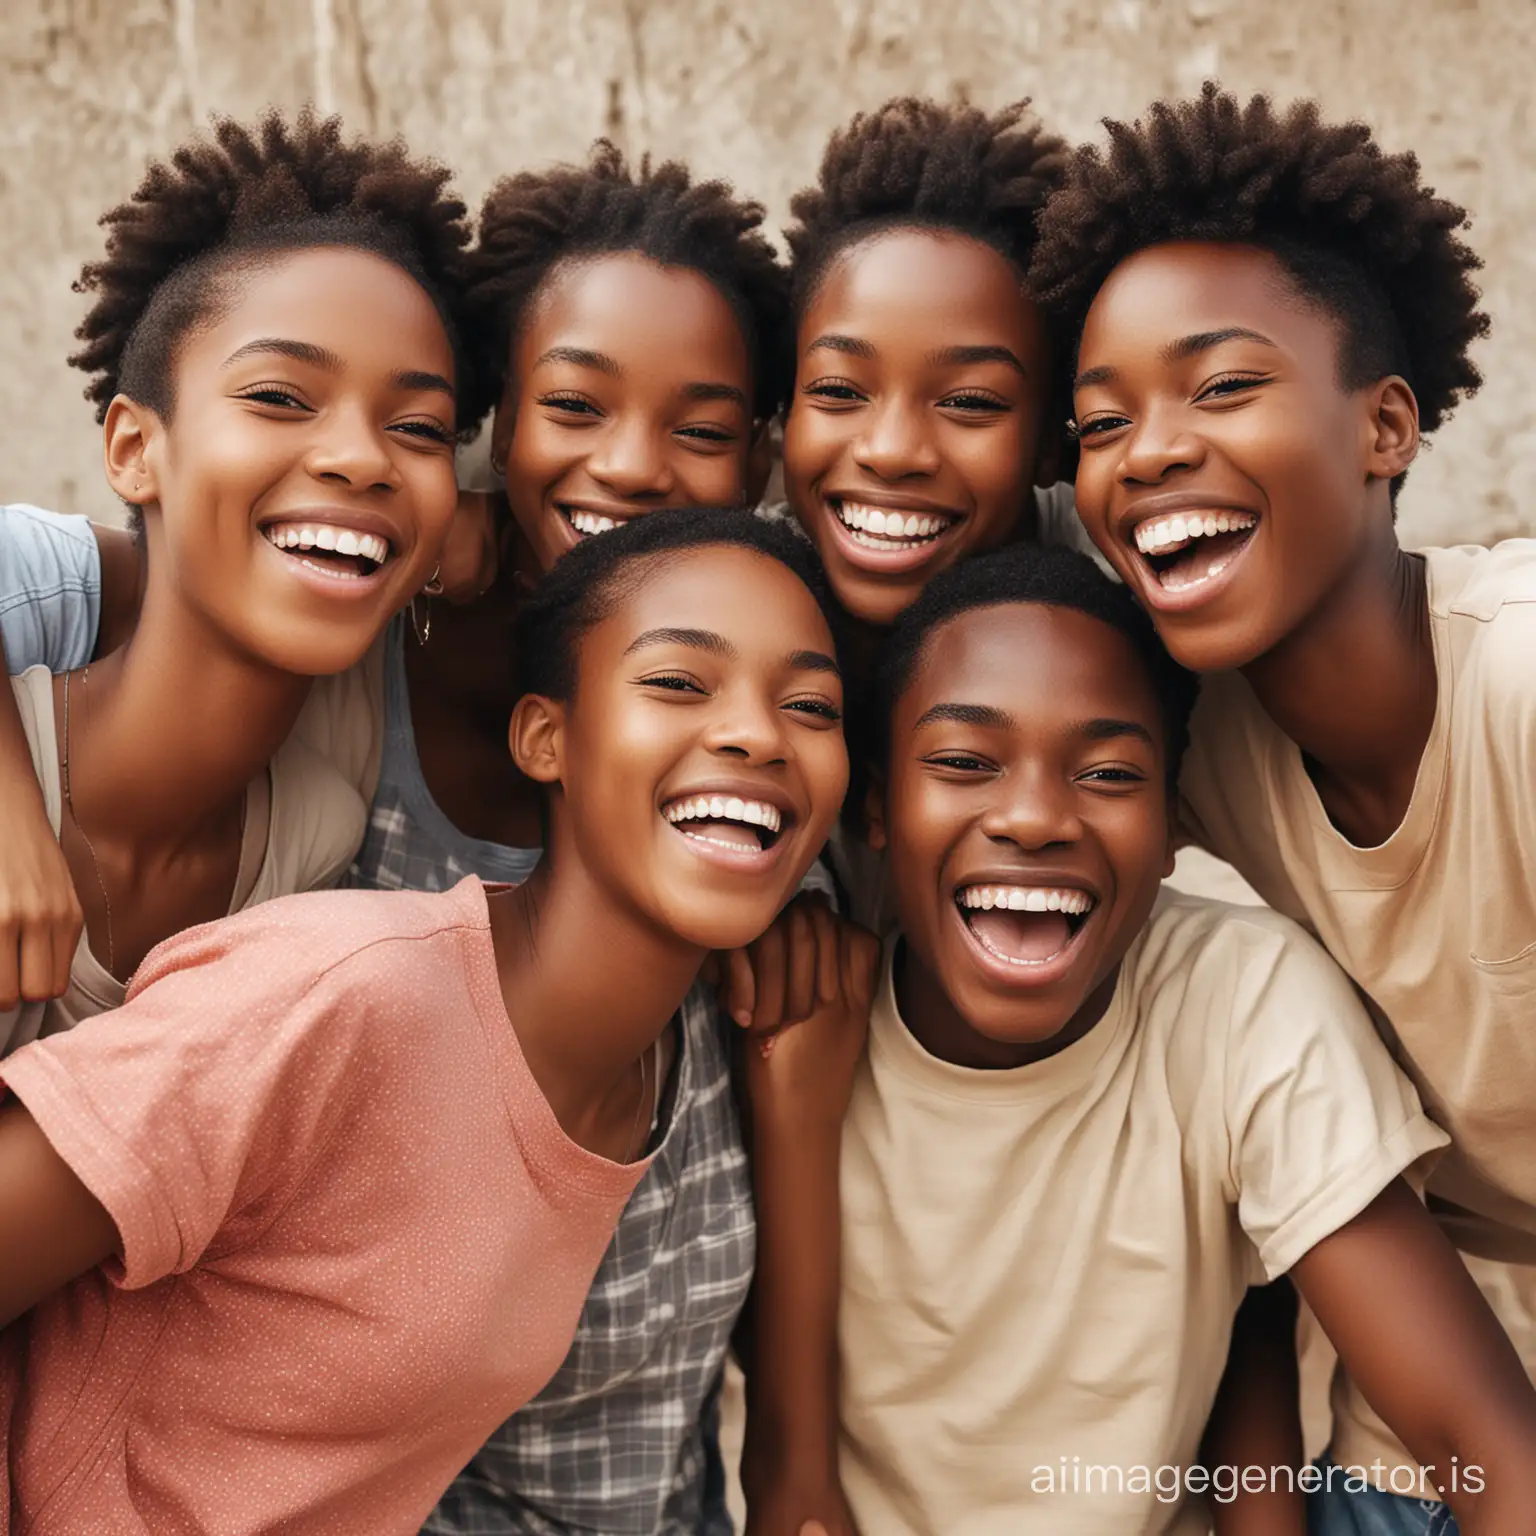 create a group of African teenagers happy and laughing together